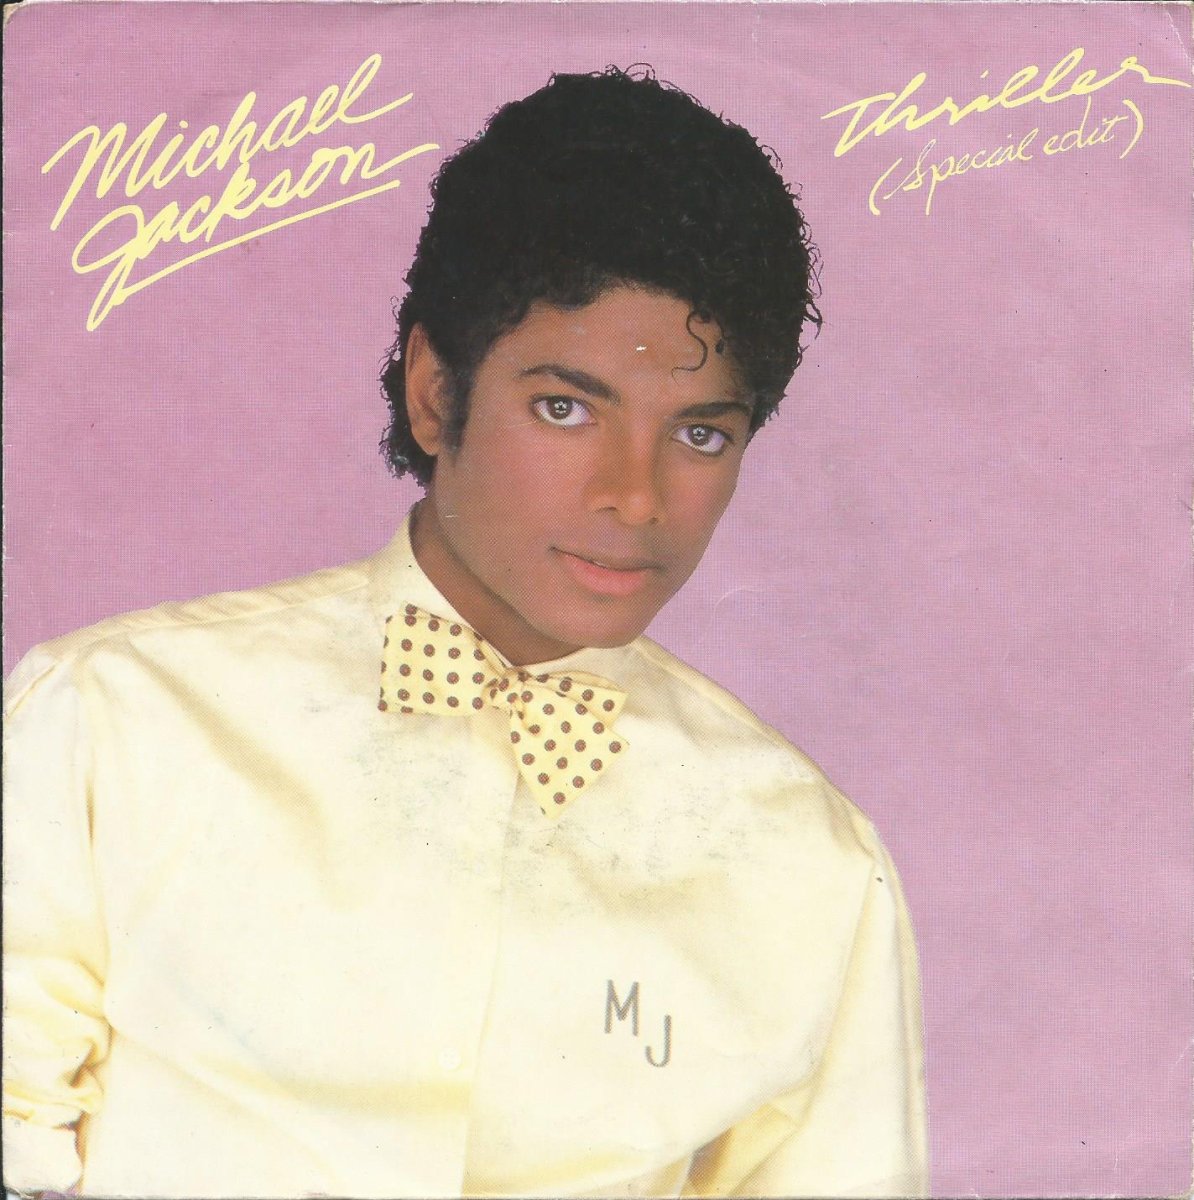 MICHAEL JACKSON / THE JACKSONS /  THRILLER (SPECIAL EDIT) / THINGS I DO FOR YOU (7